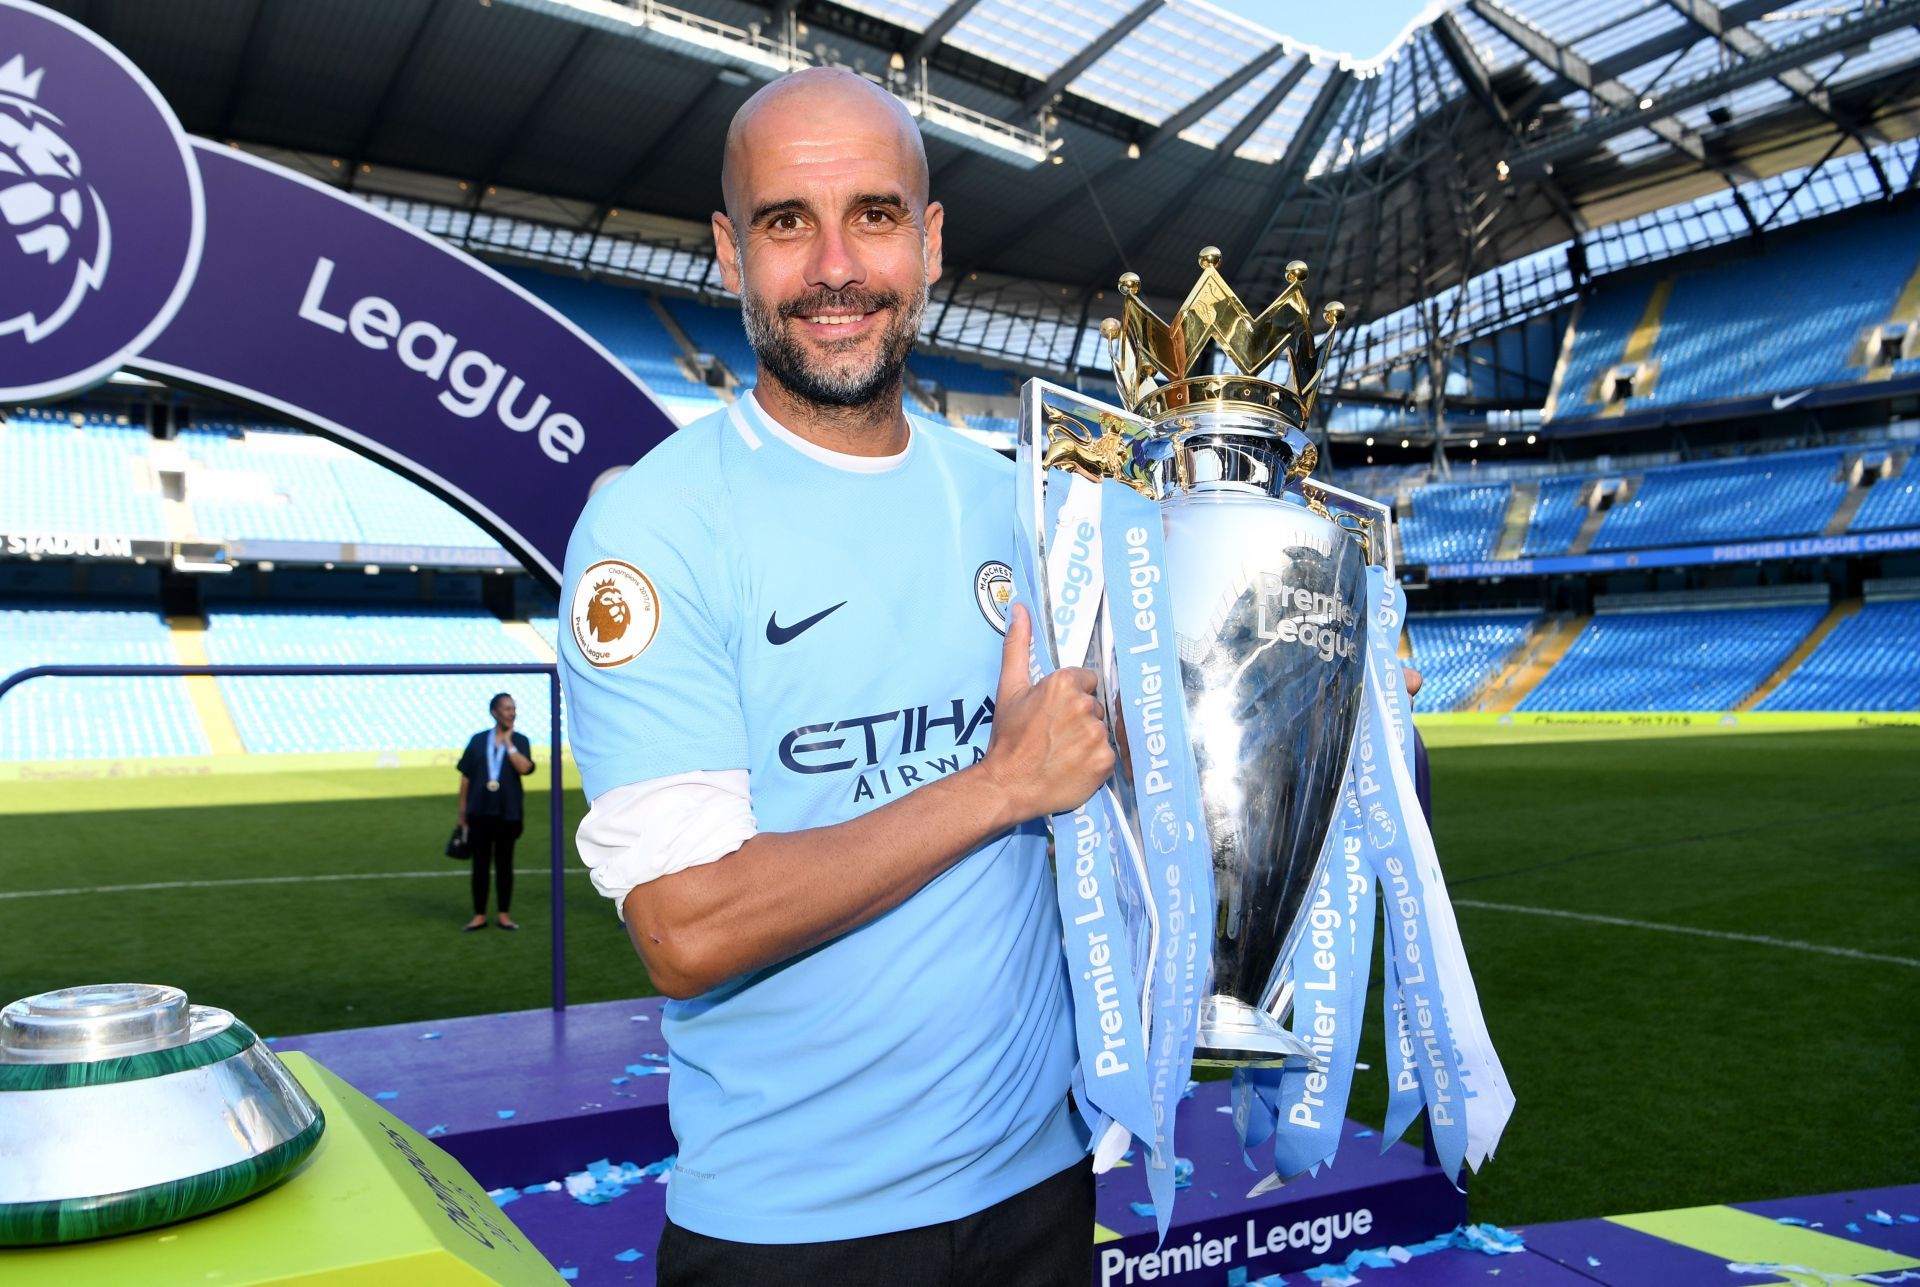 Pep Guardiola can win his fourth league title in England this campaign